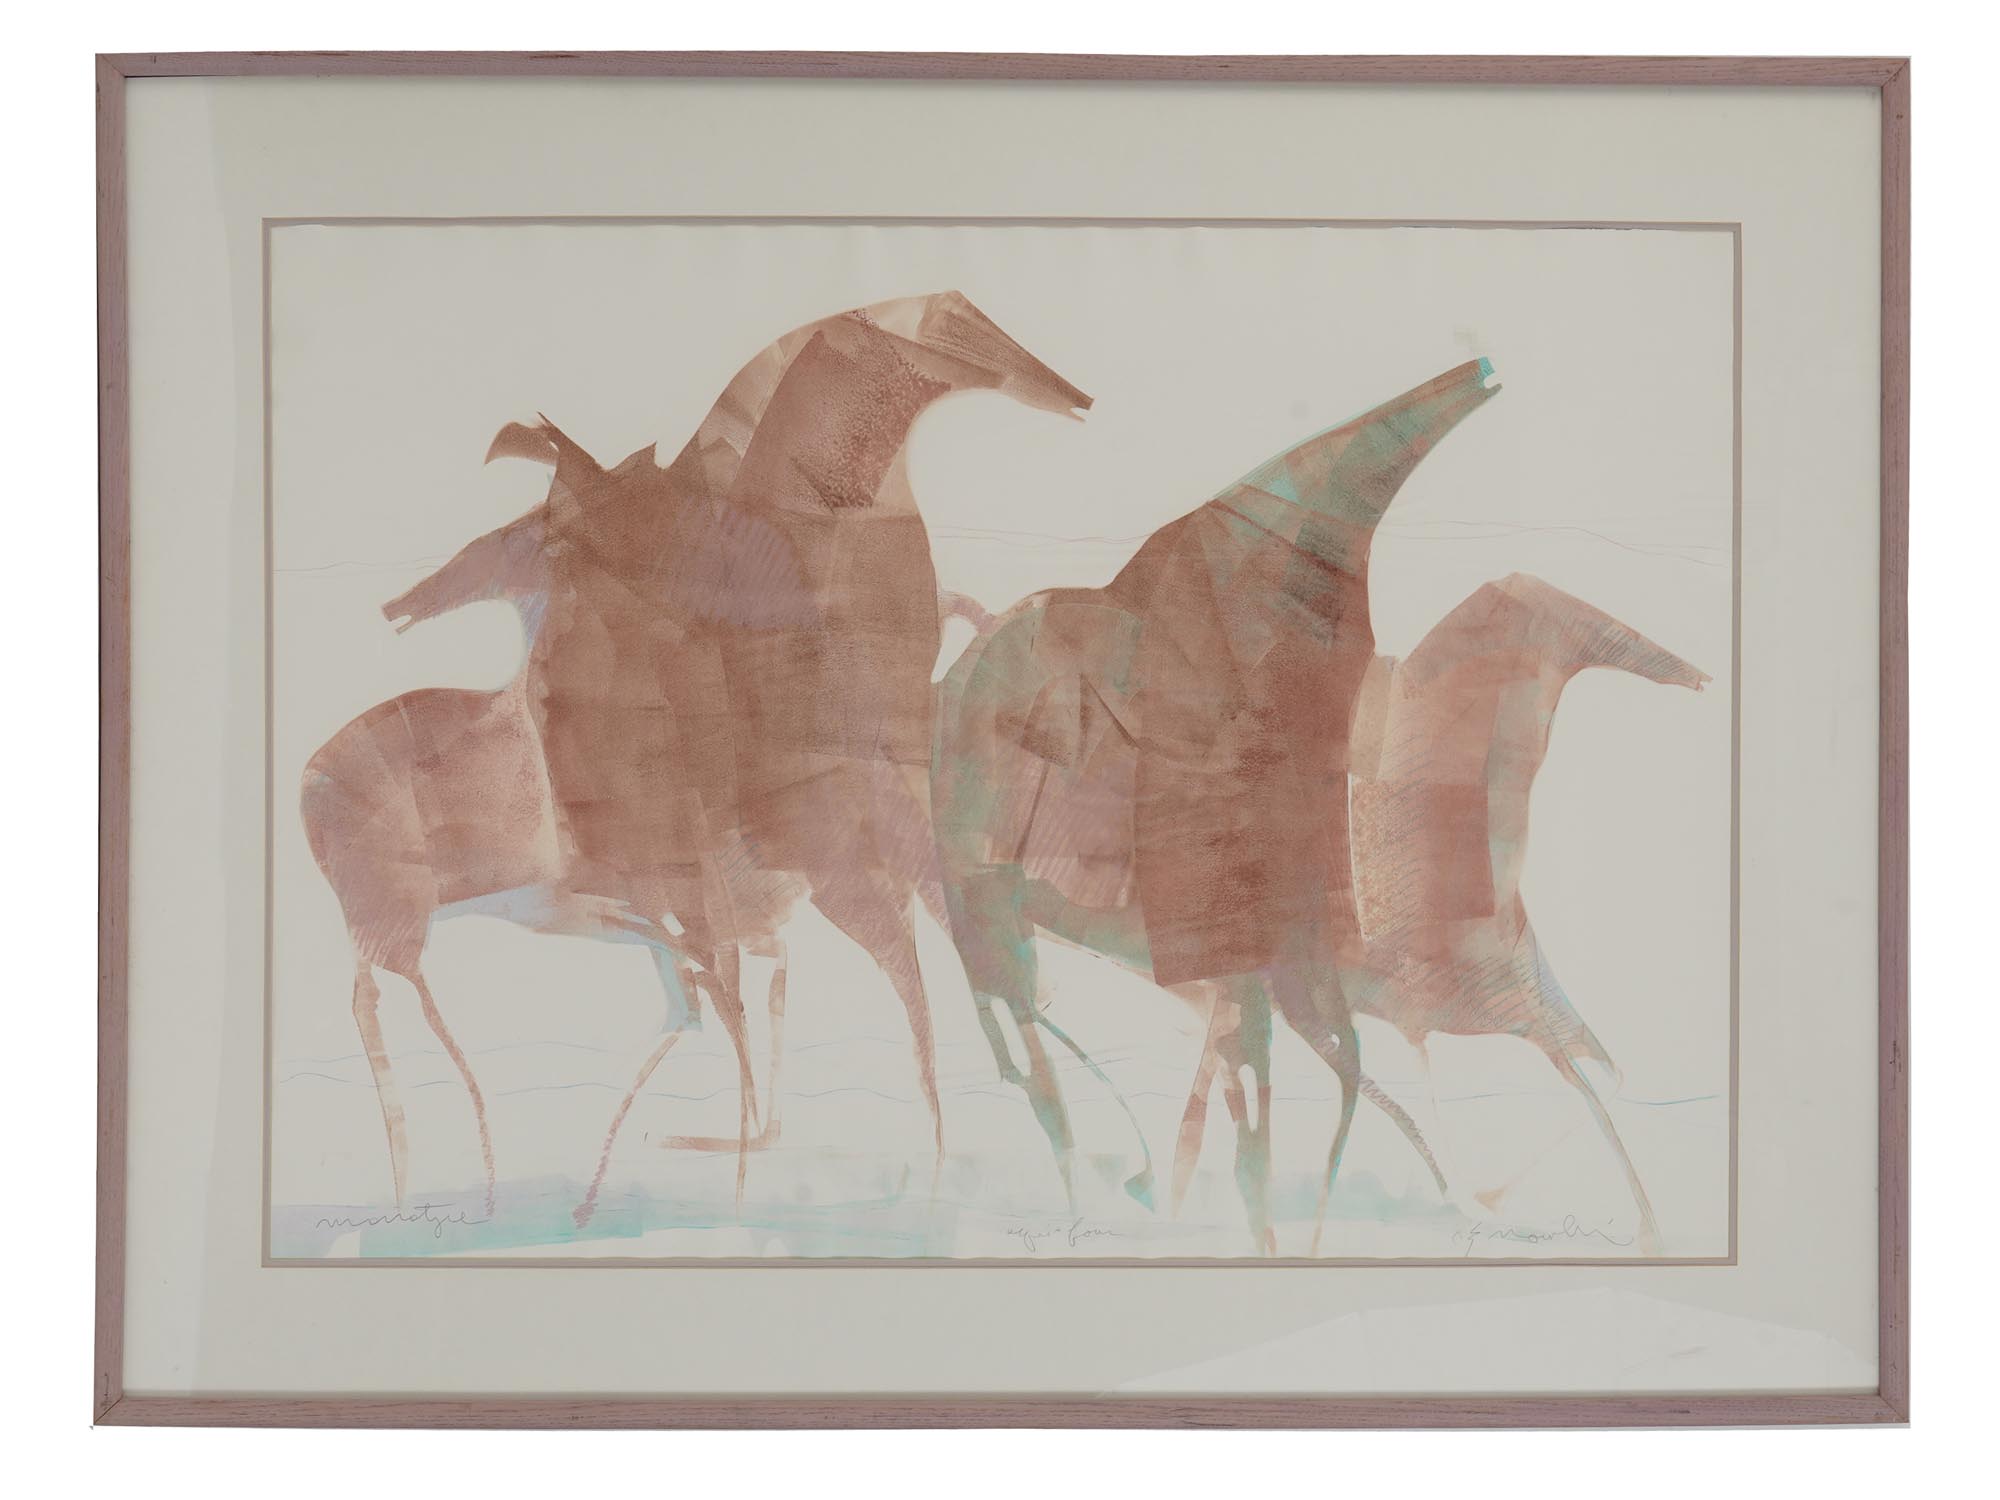 ABSTRACT WATERCOLOR PAINTING OF HORSES, SIGNED PIC-0